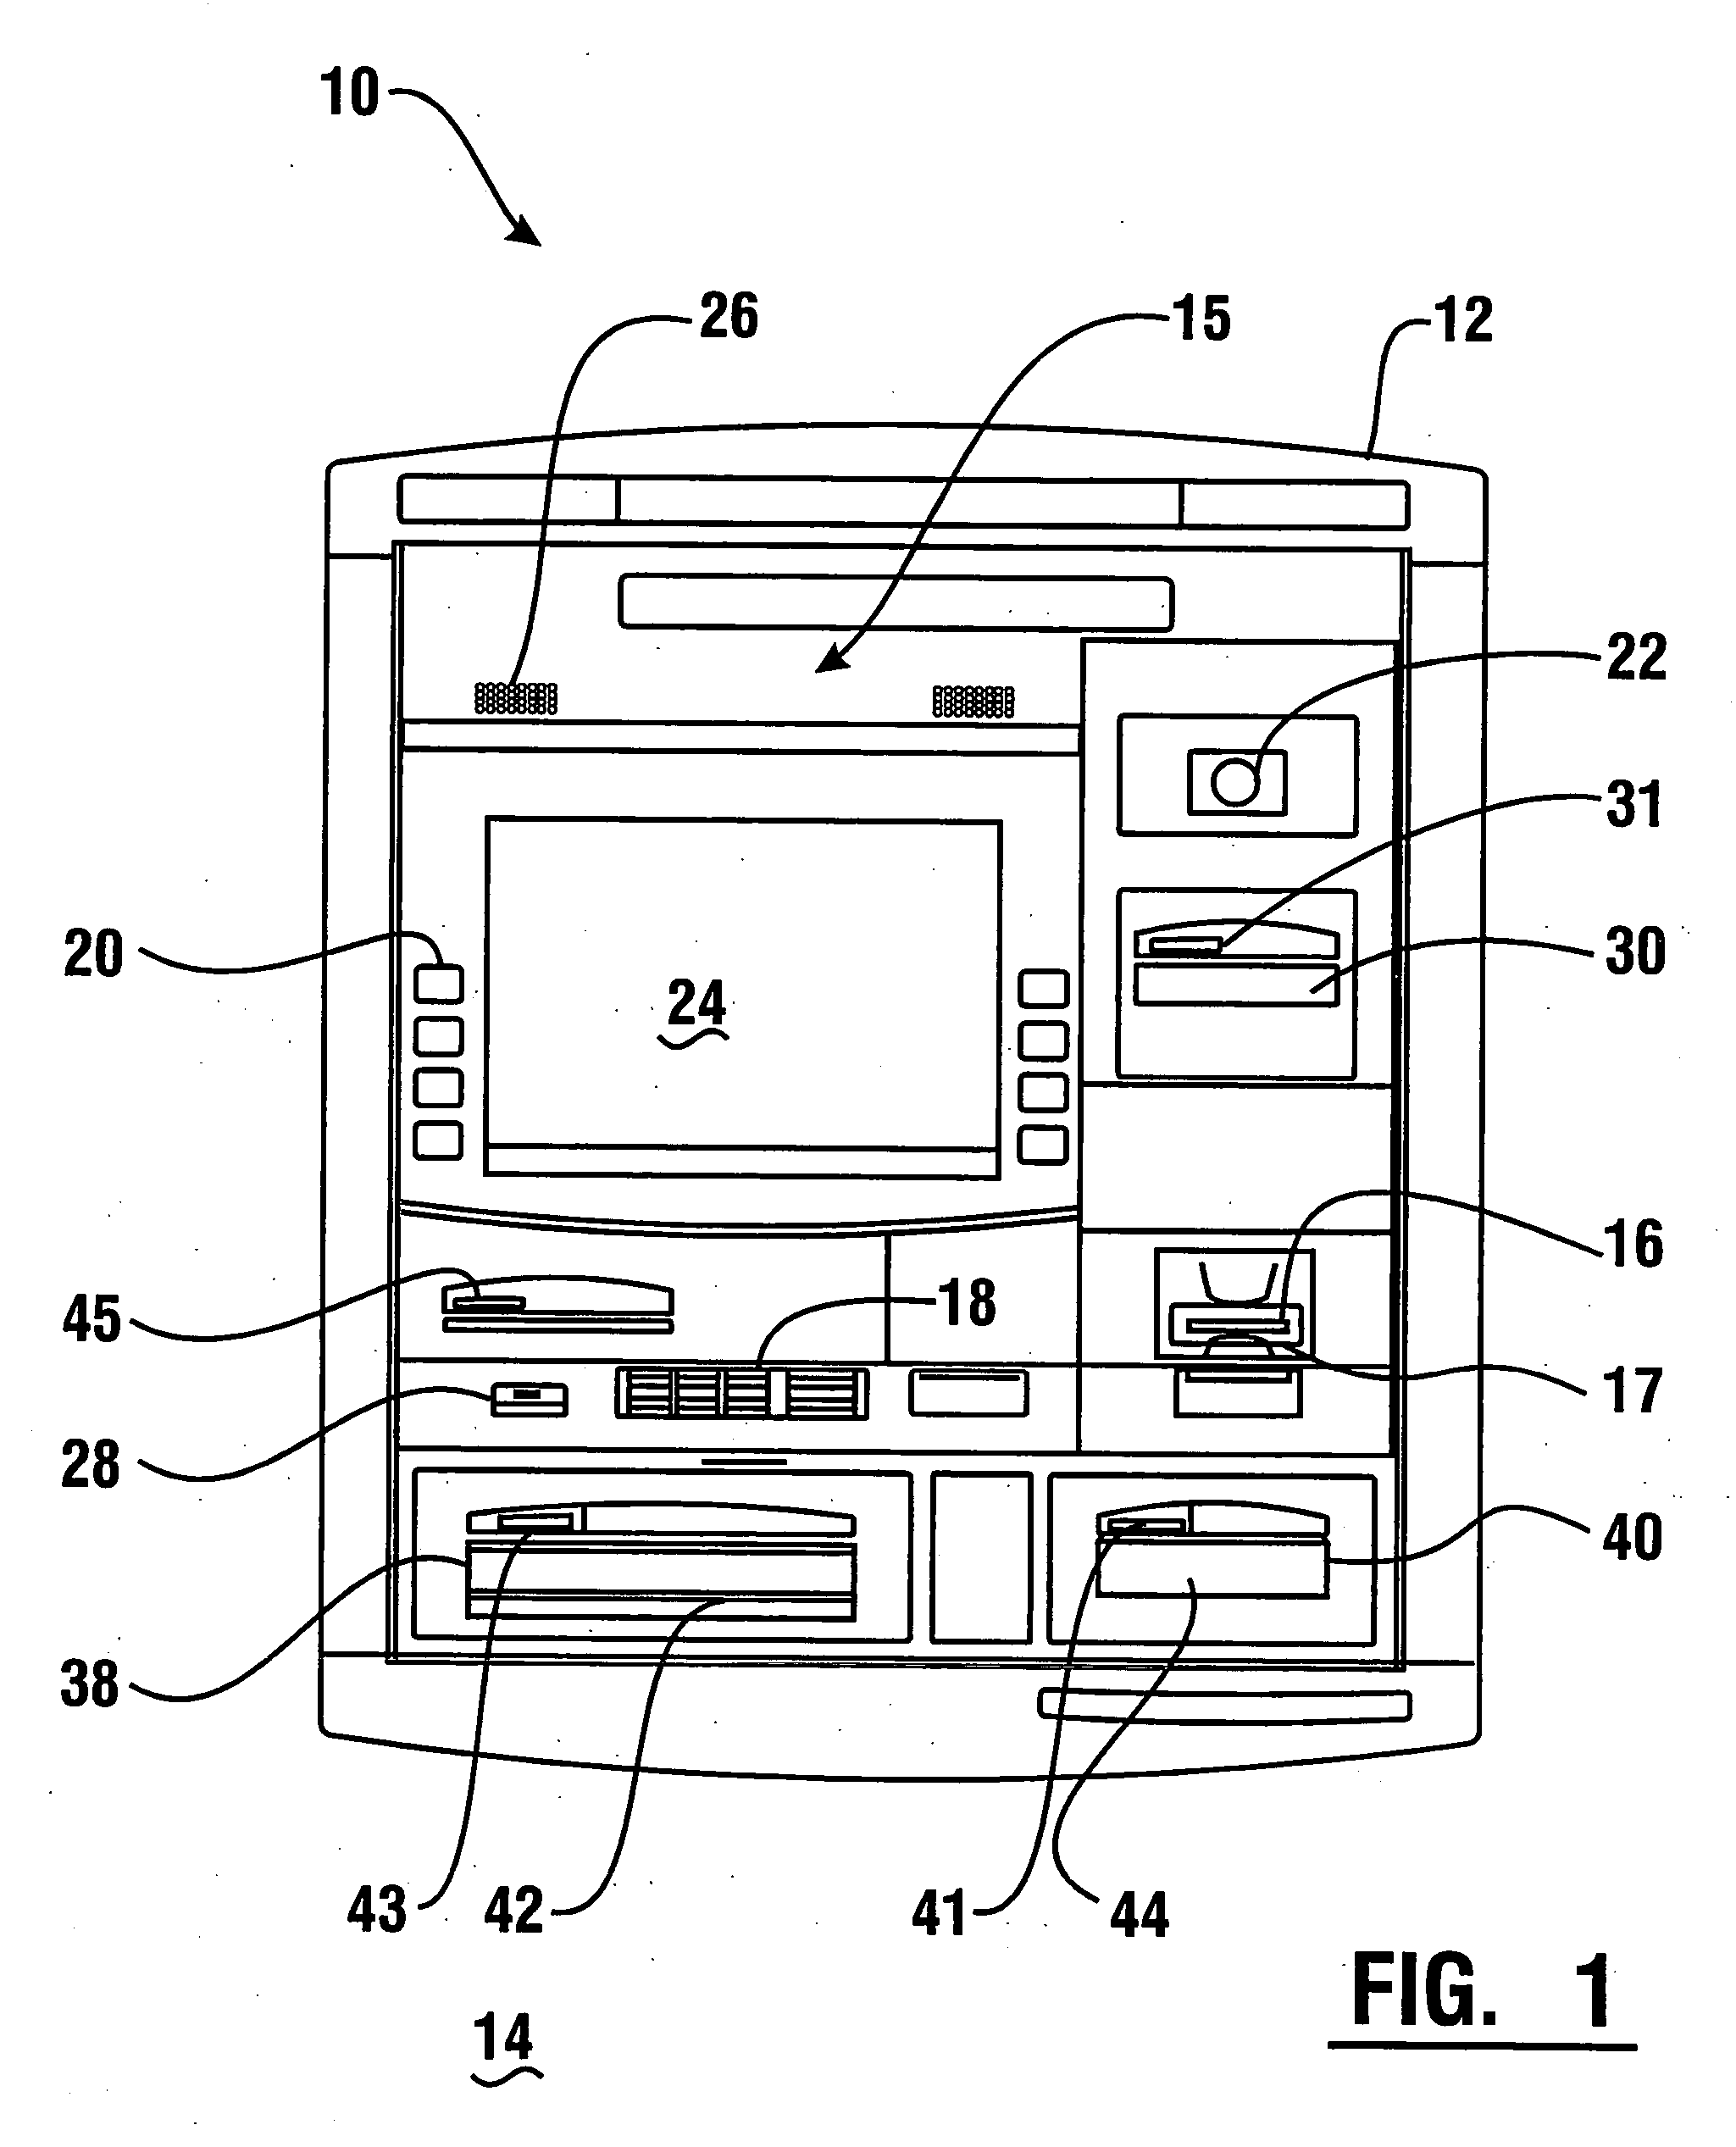 Cash dispensing automated banking machine with note unstacking and validation